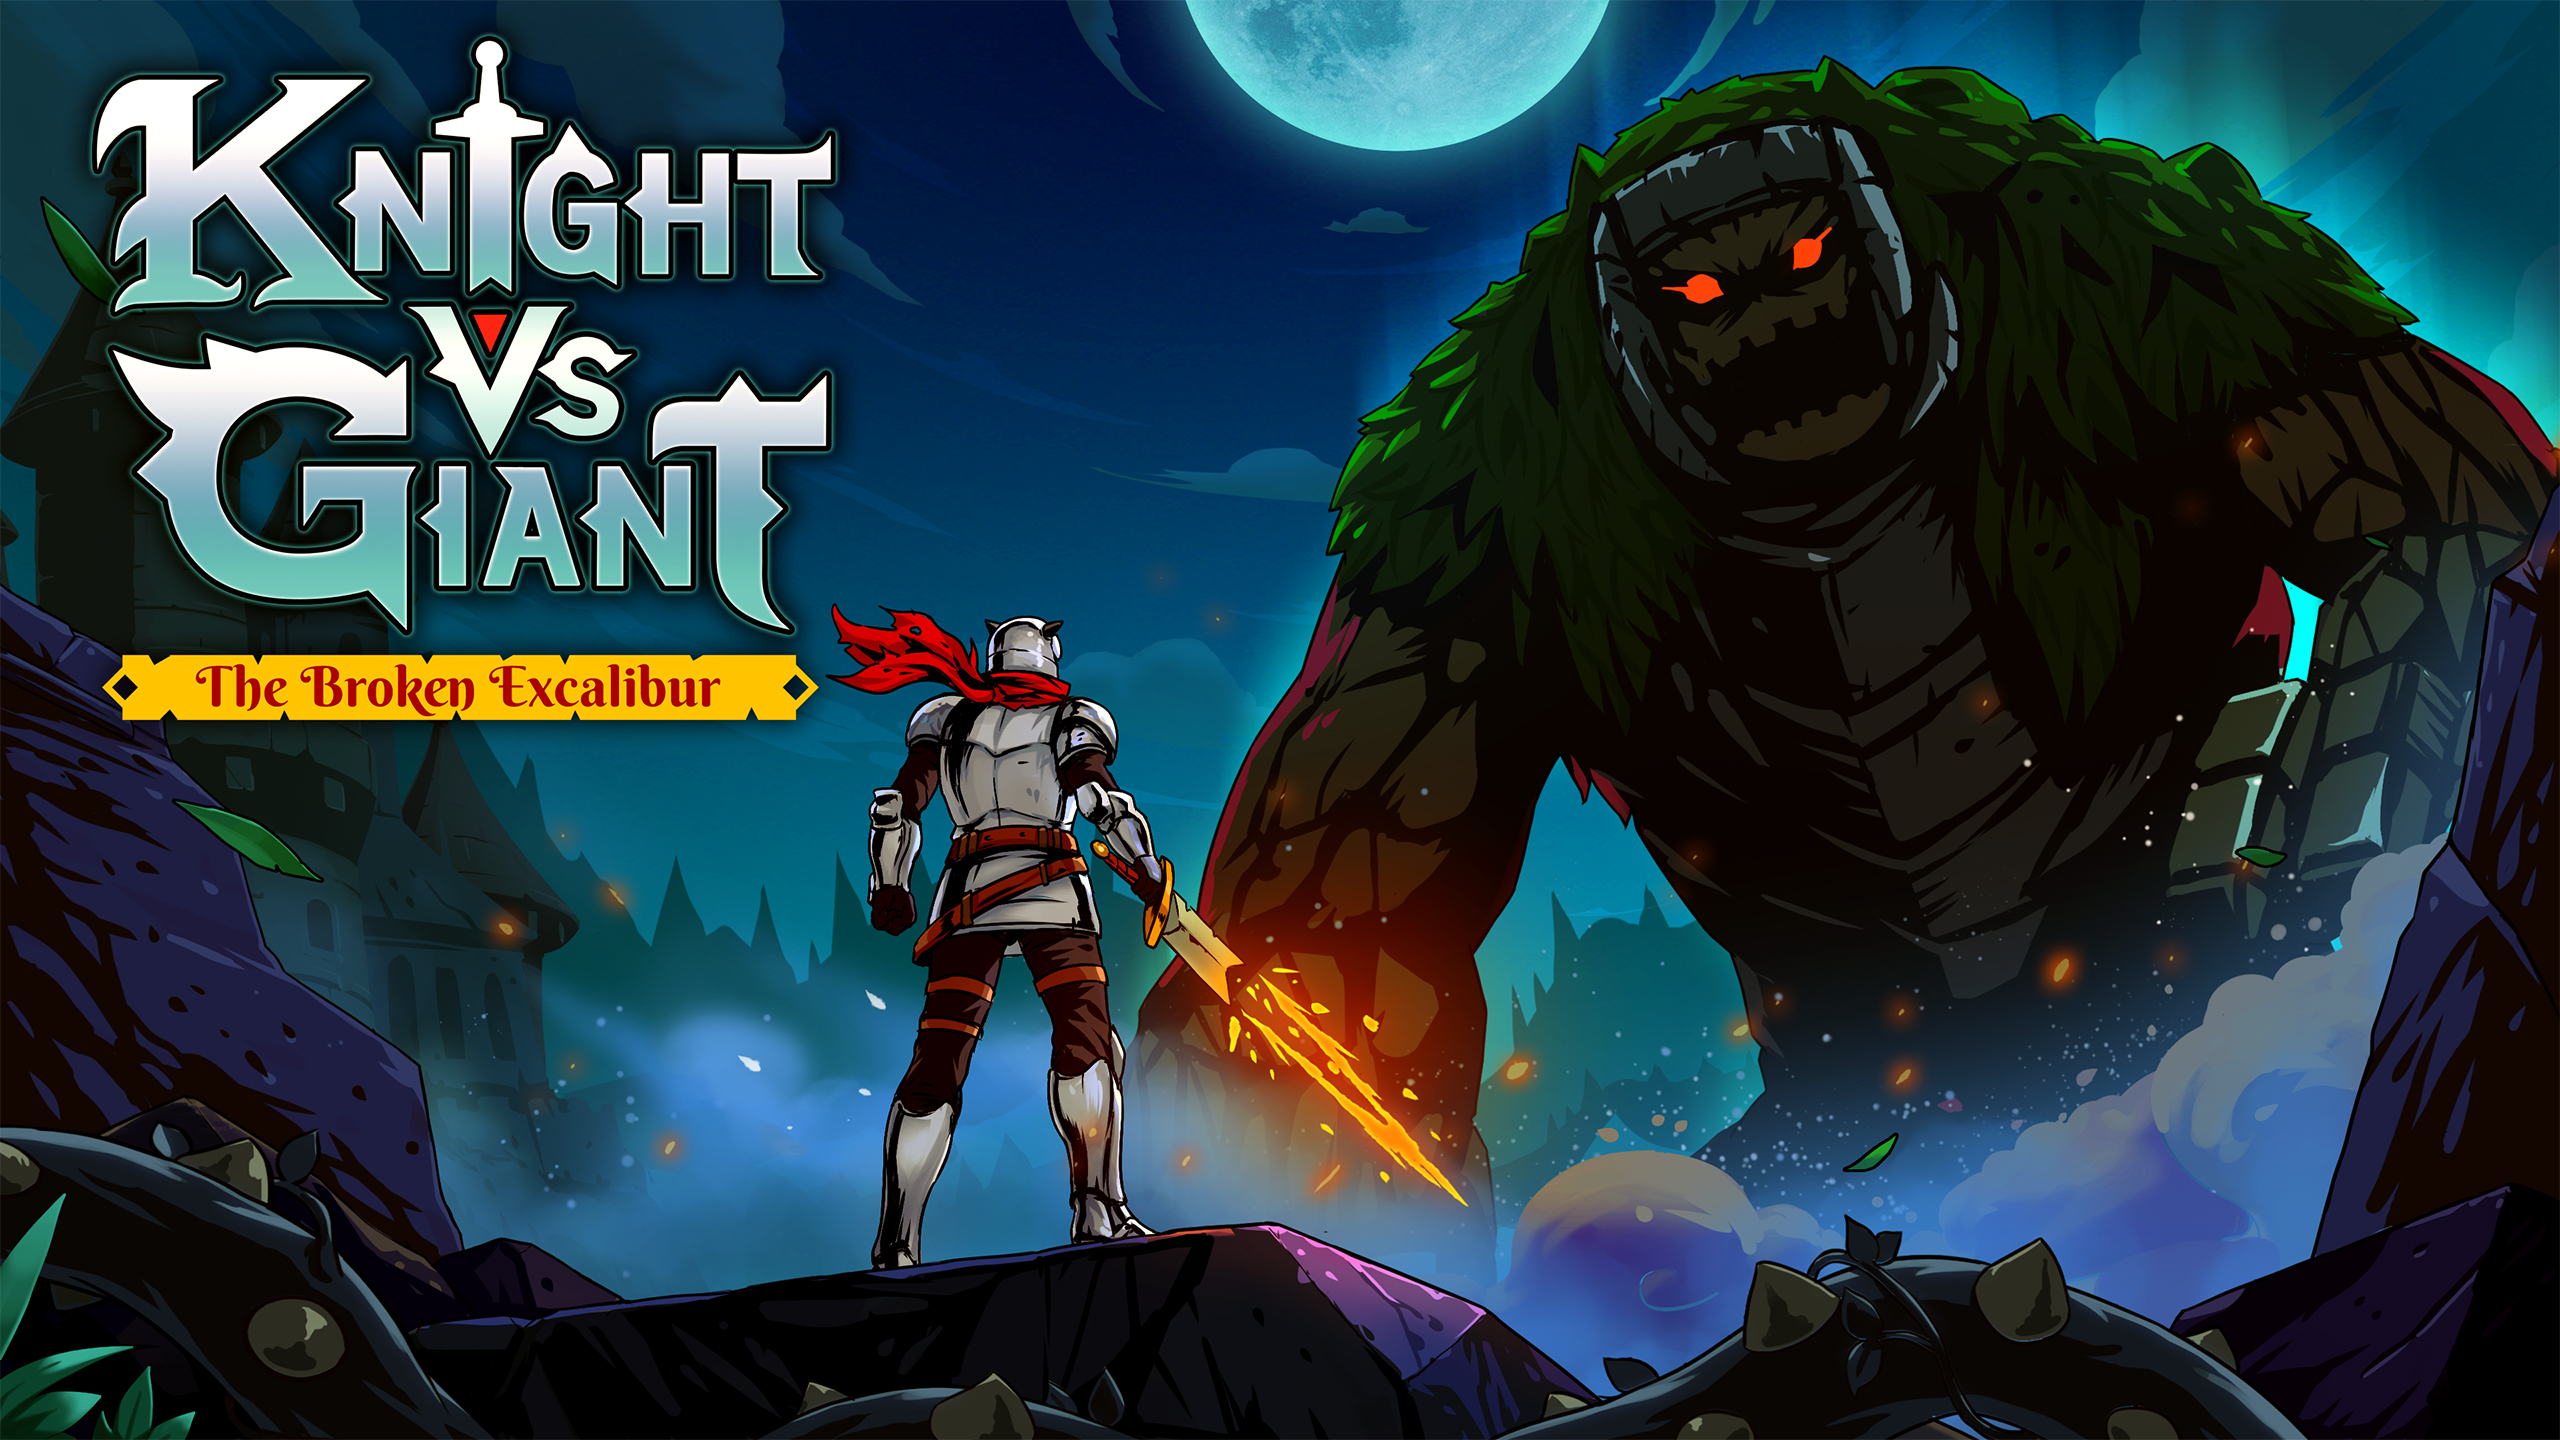 Apple Knight, Review & Gameplay